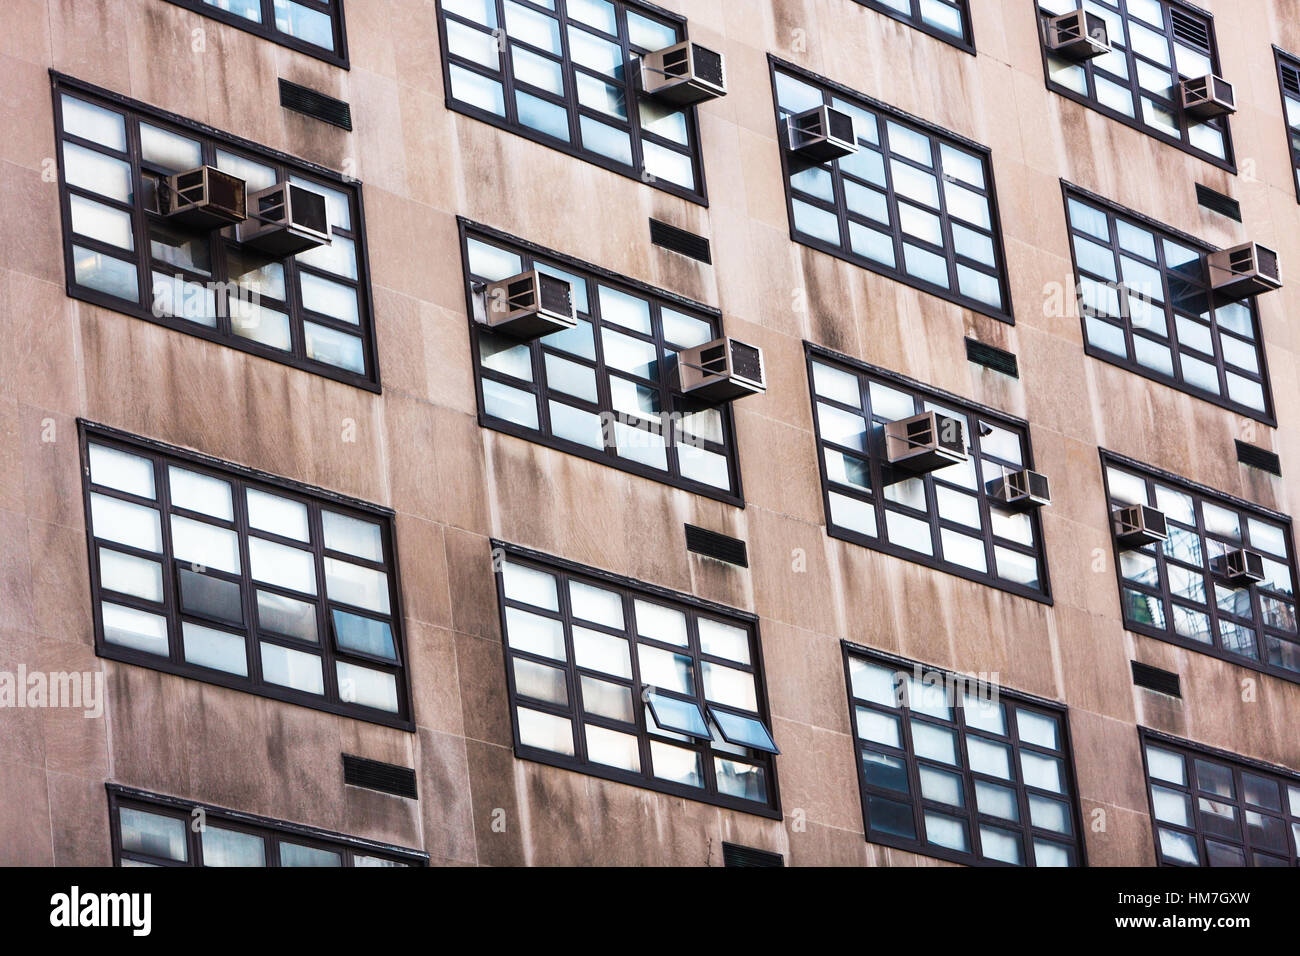 USA, New York, Building with air conditioners Stock Photo